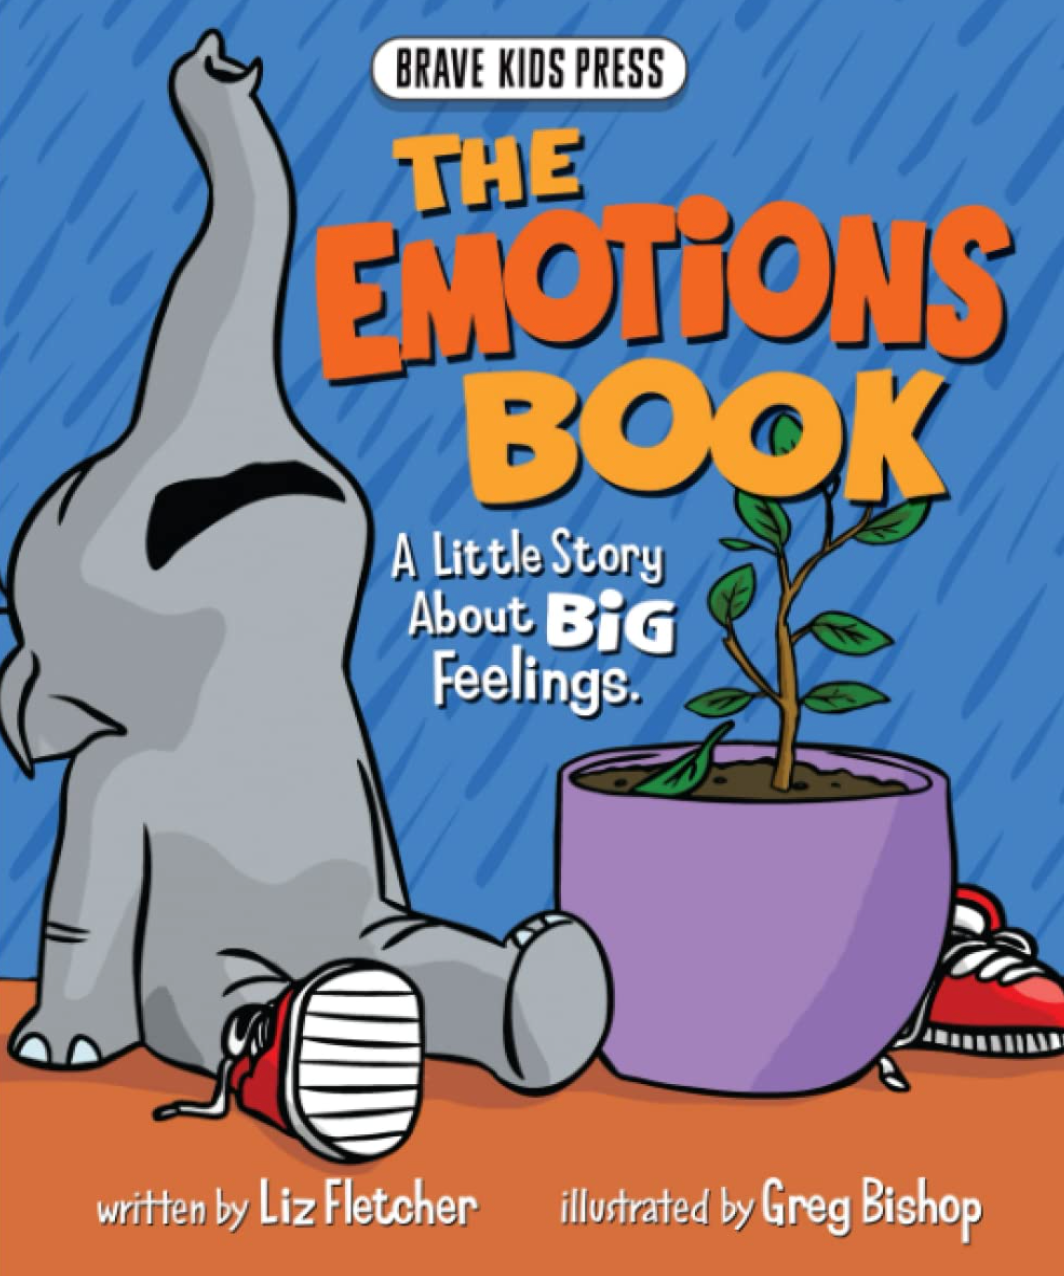 The Emotions Book: A Little Story About Big Emotions